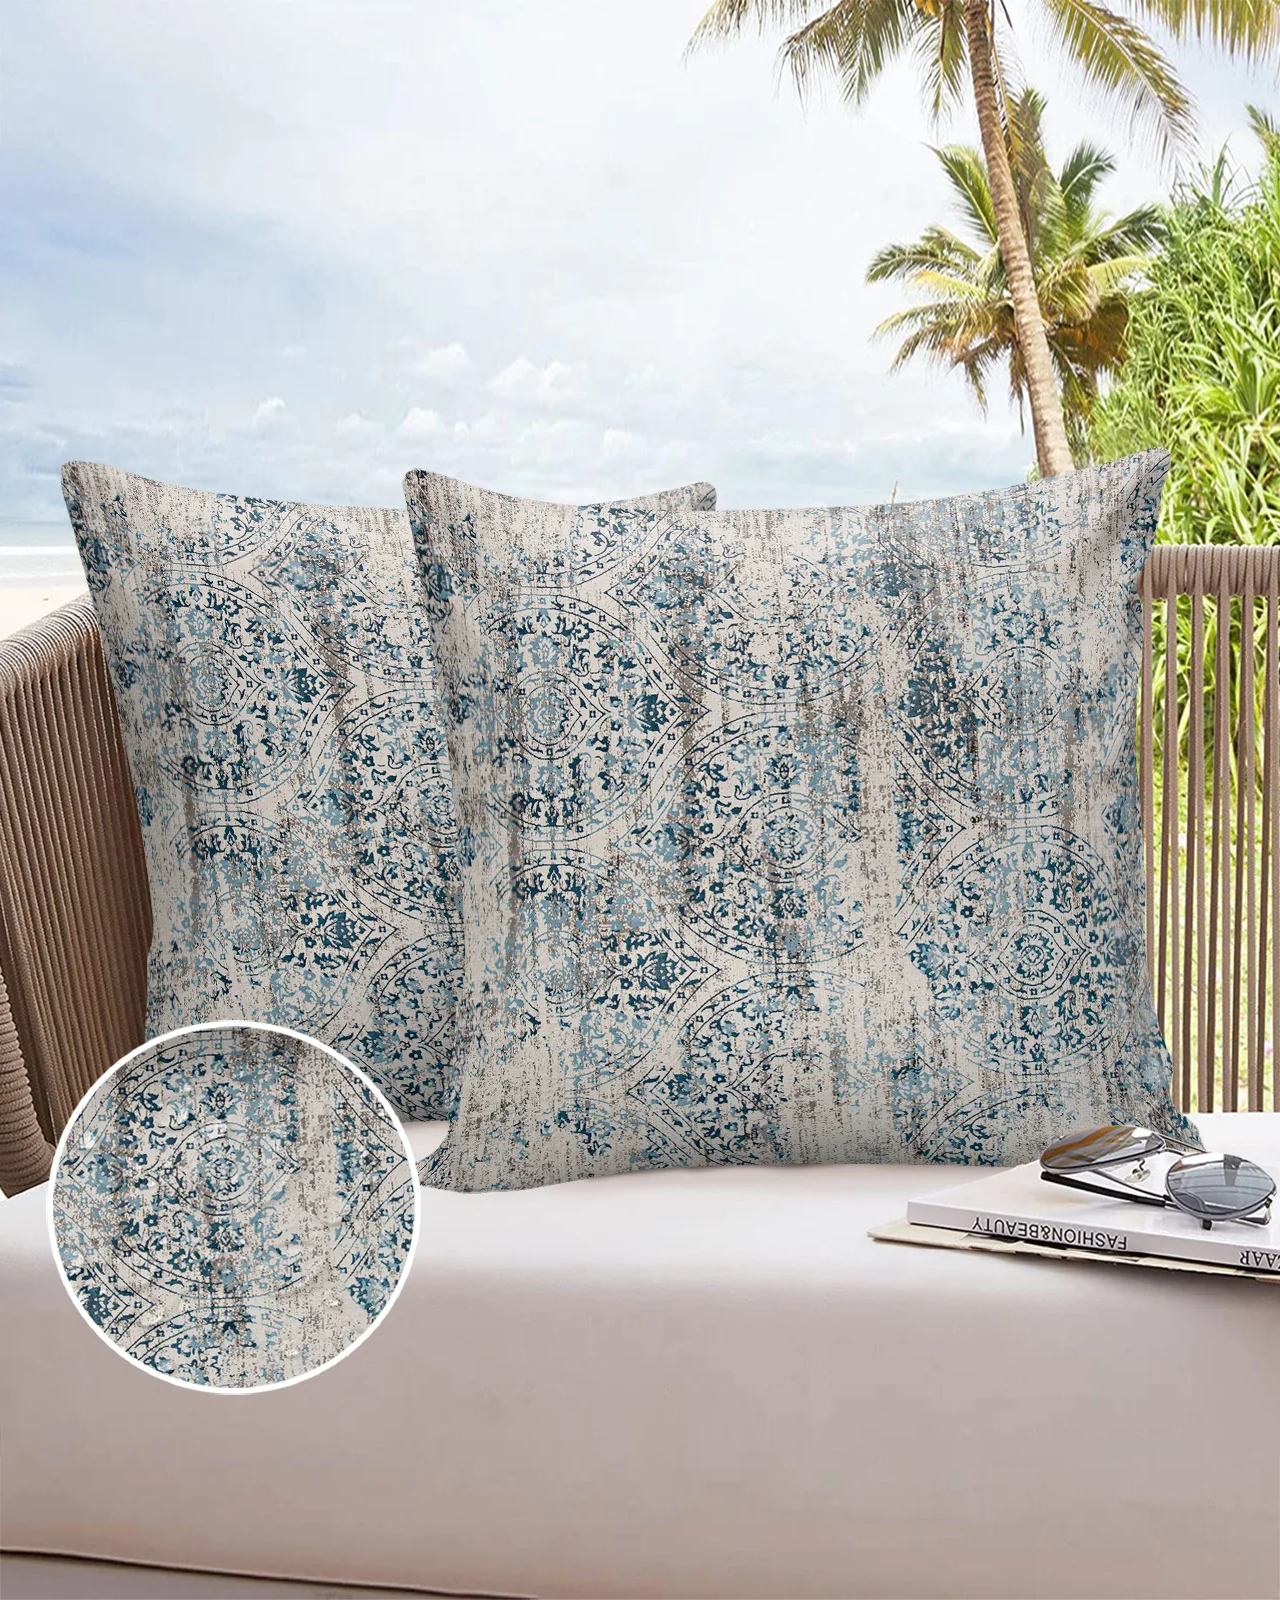 Retro Shabby Pattern Blue Waterproof Pillow Cover Home Office Decoration Pillow Case Chair Sofa Cushion Cover